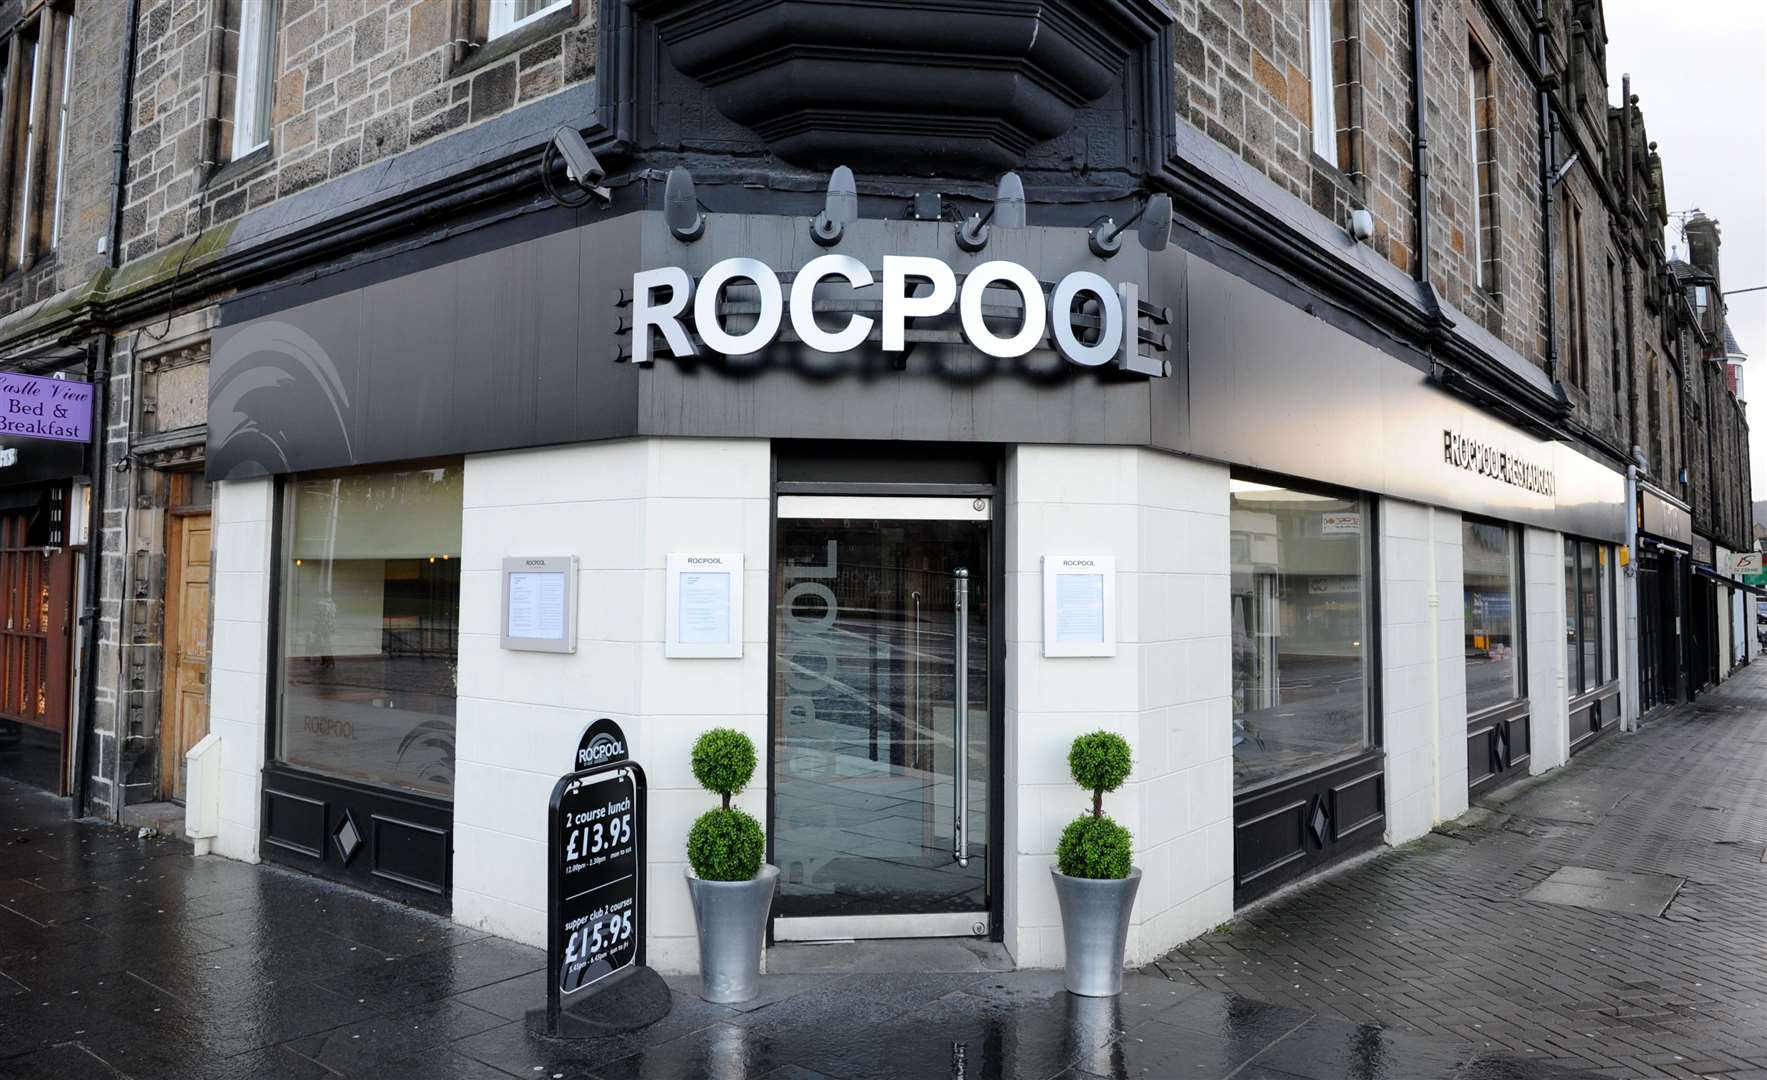 Rocpool restaurant which will reopen from Monday.